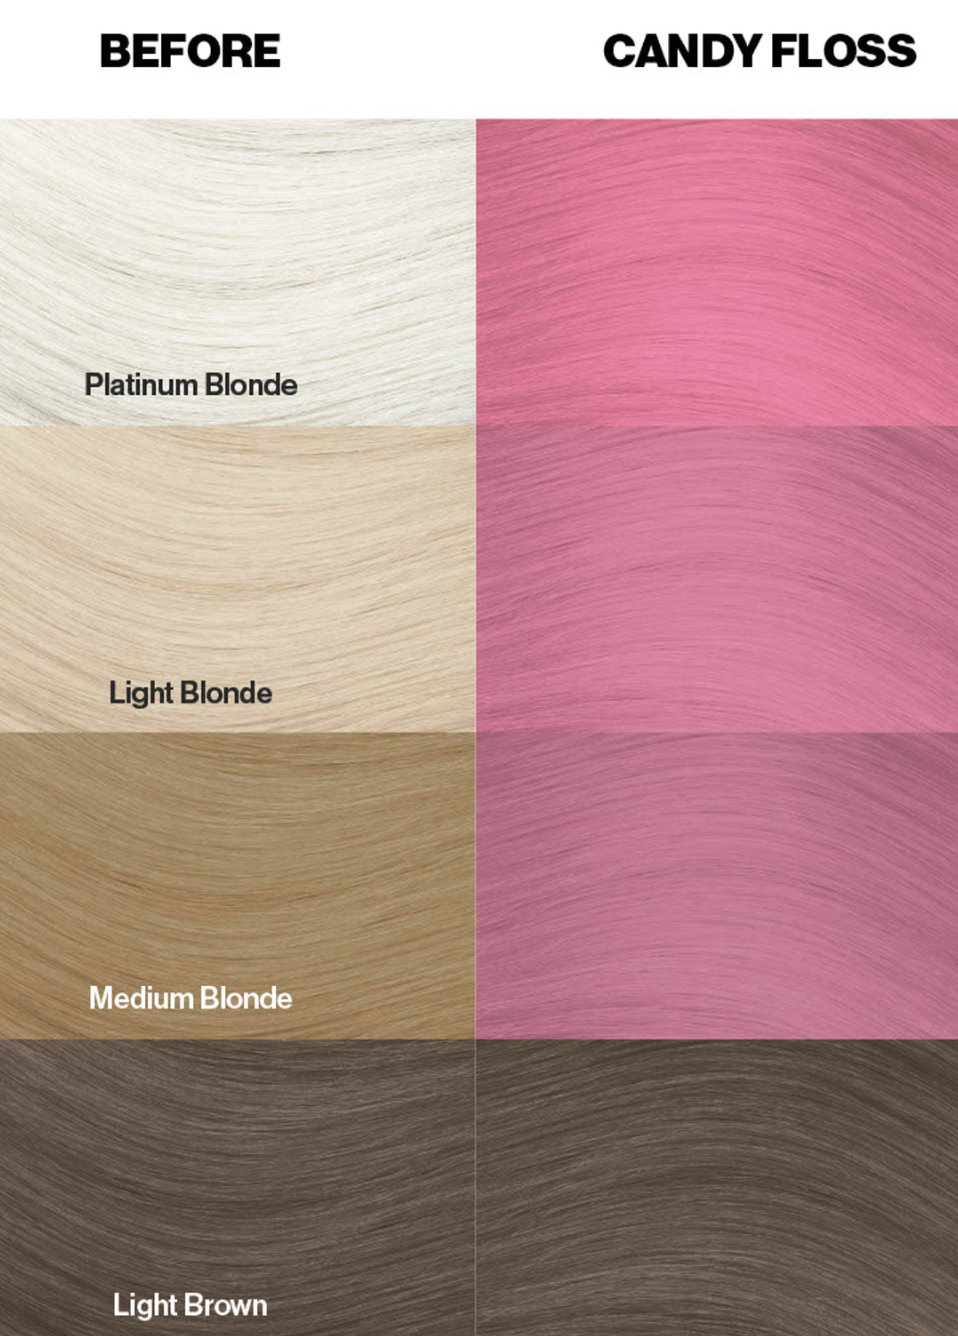 the different shades of hair that can be dyed